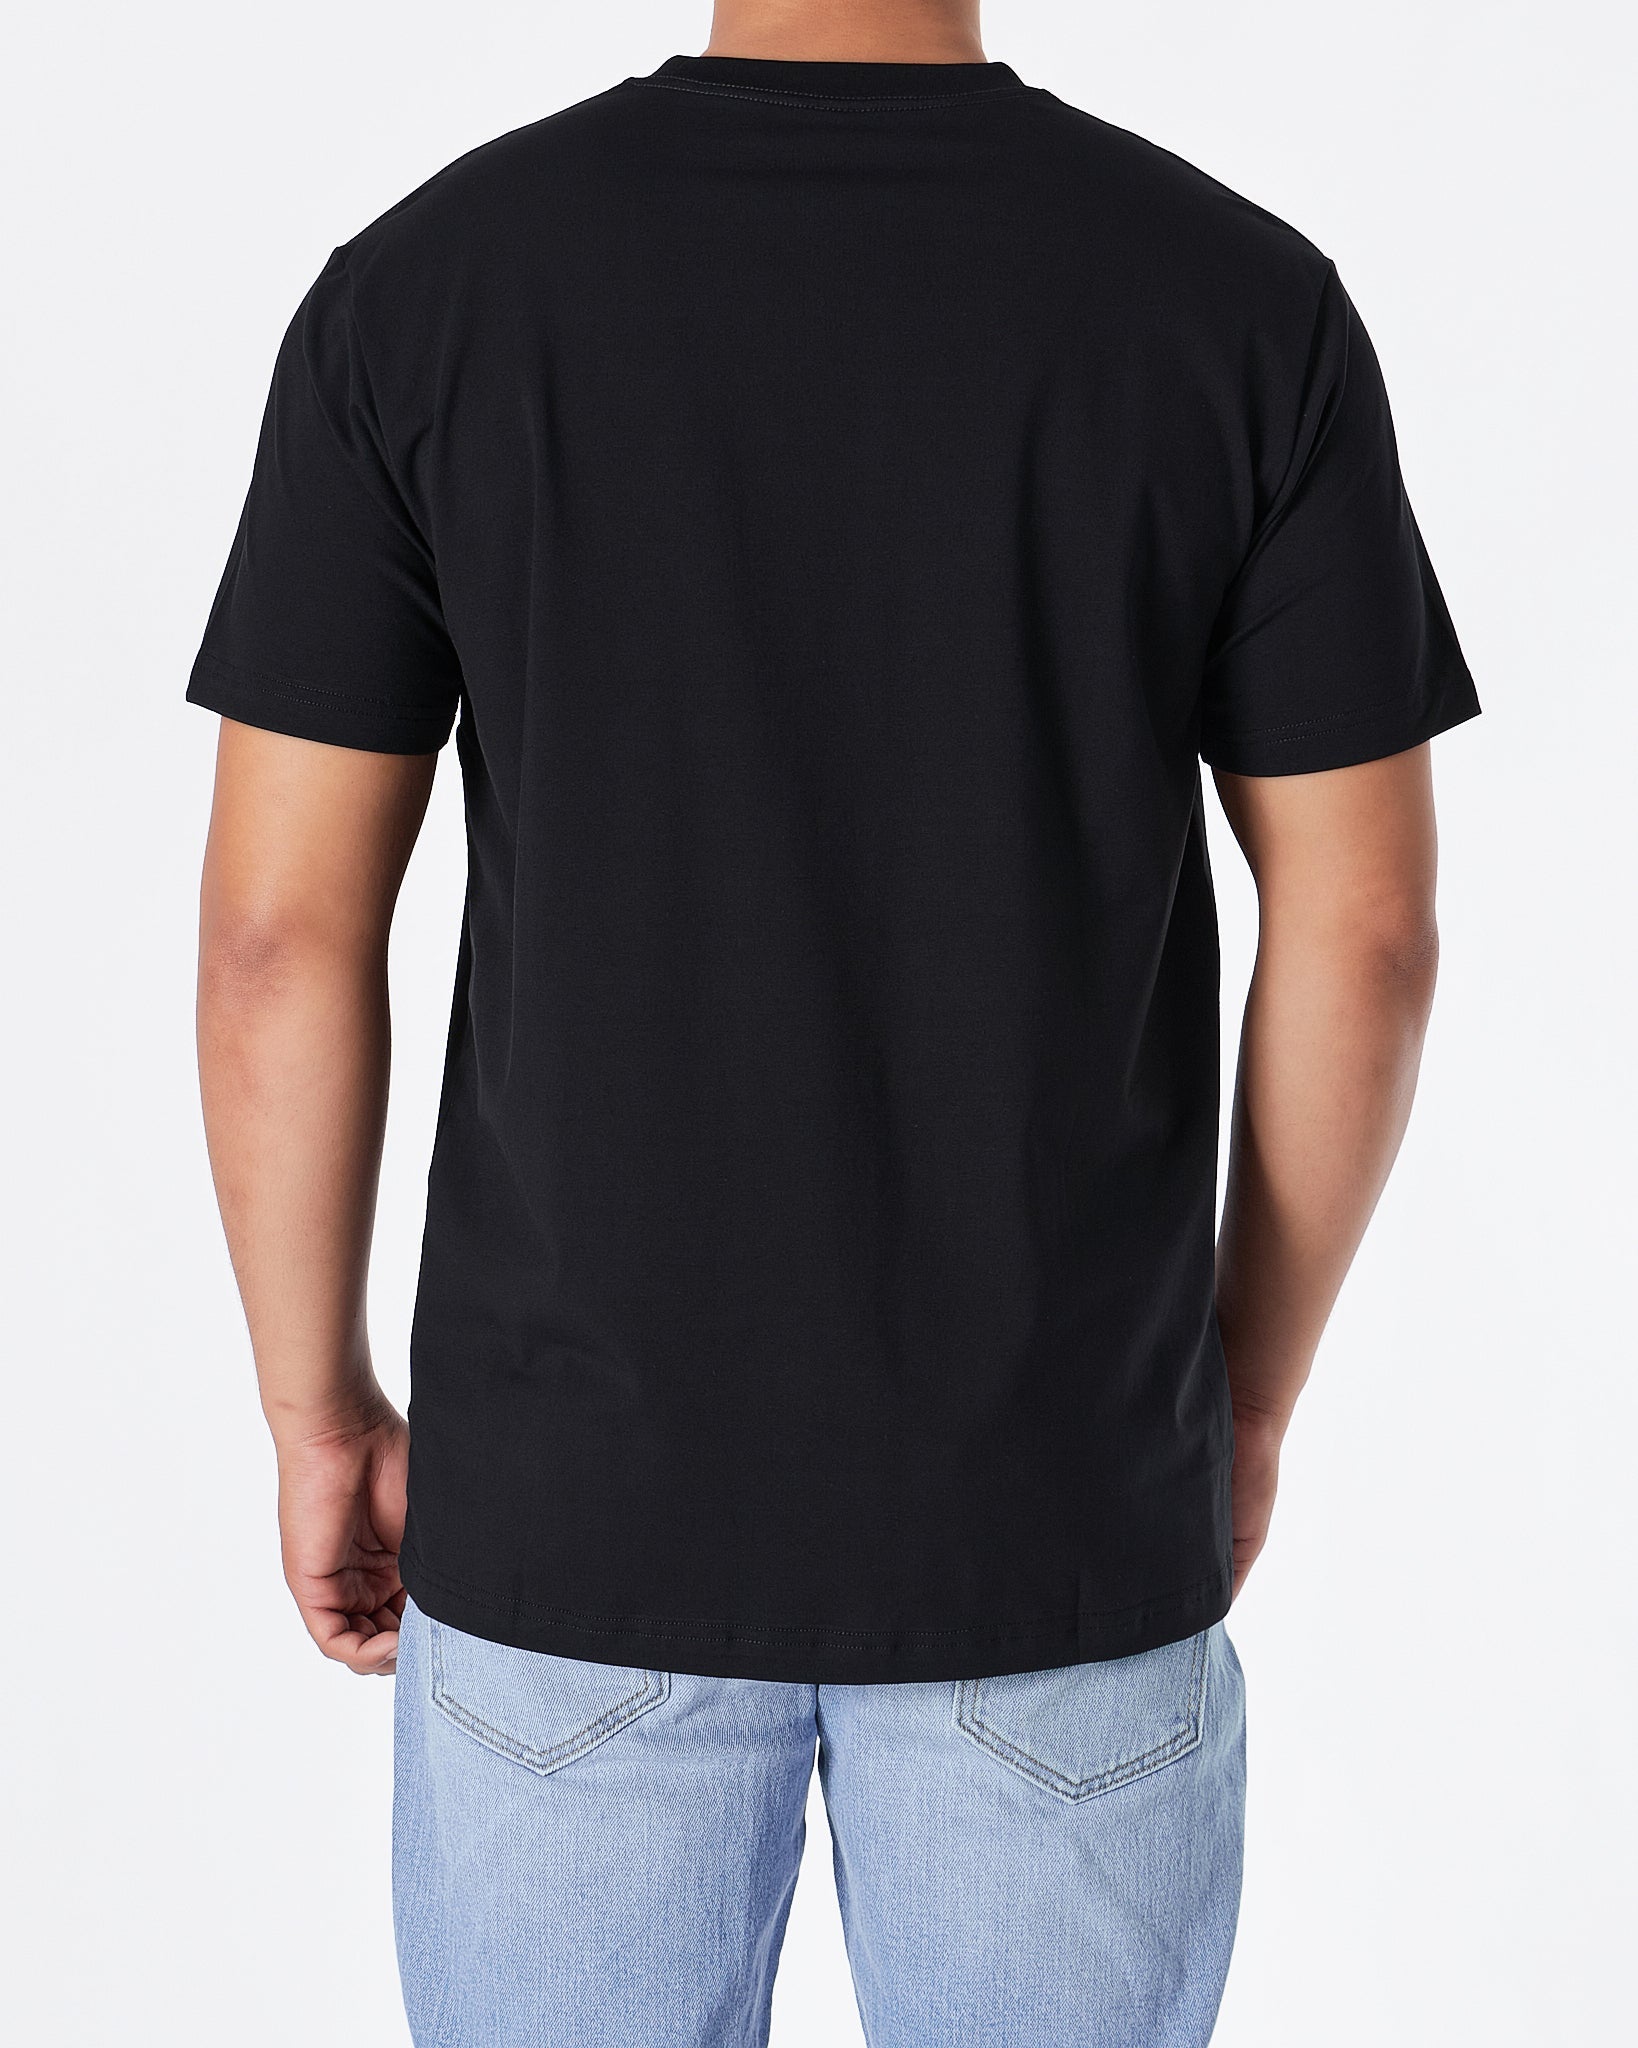 MOI OUTFIT-NIK Air Embroidered Men Black T-Shirt 16.90